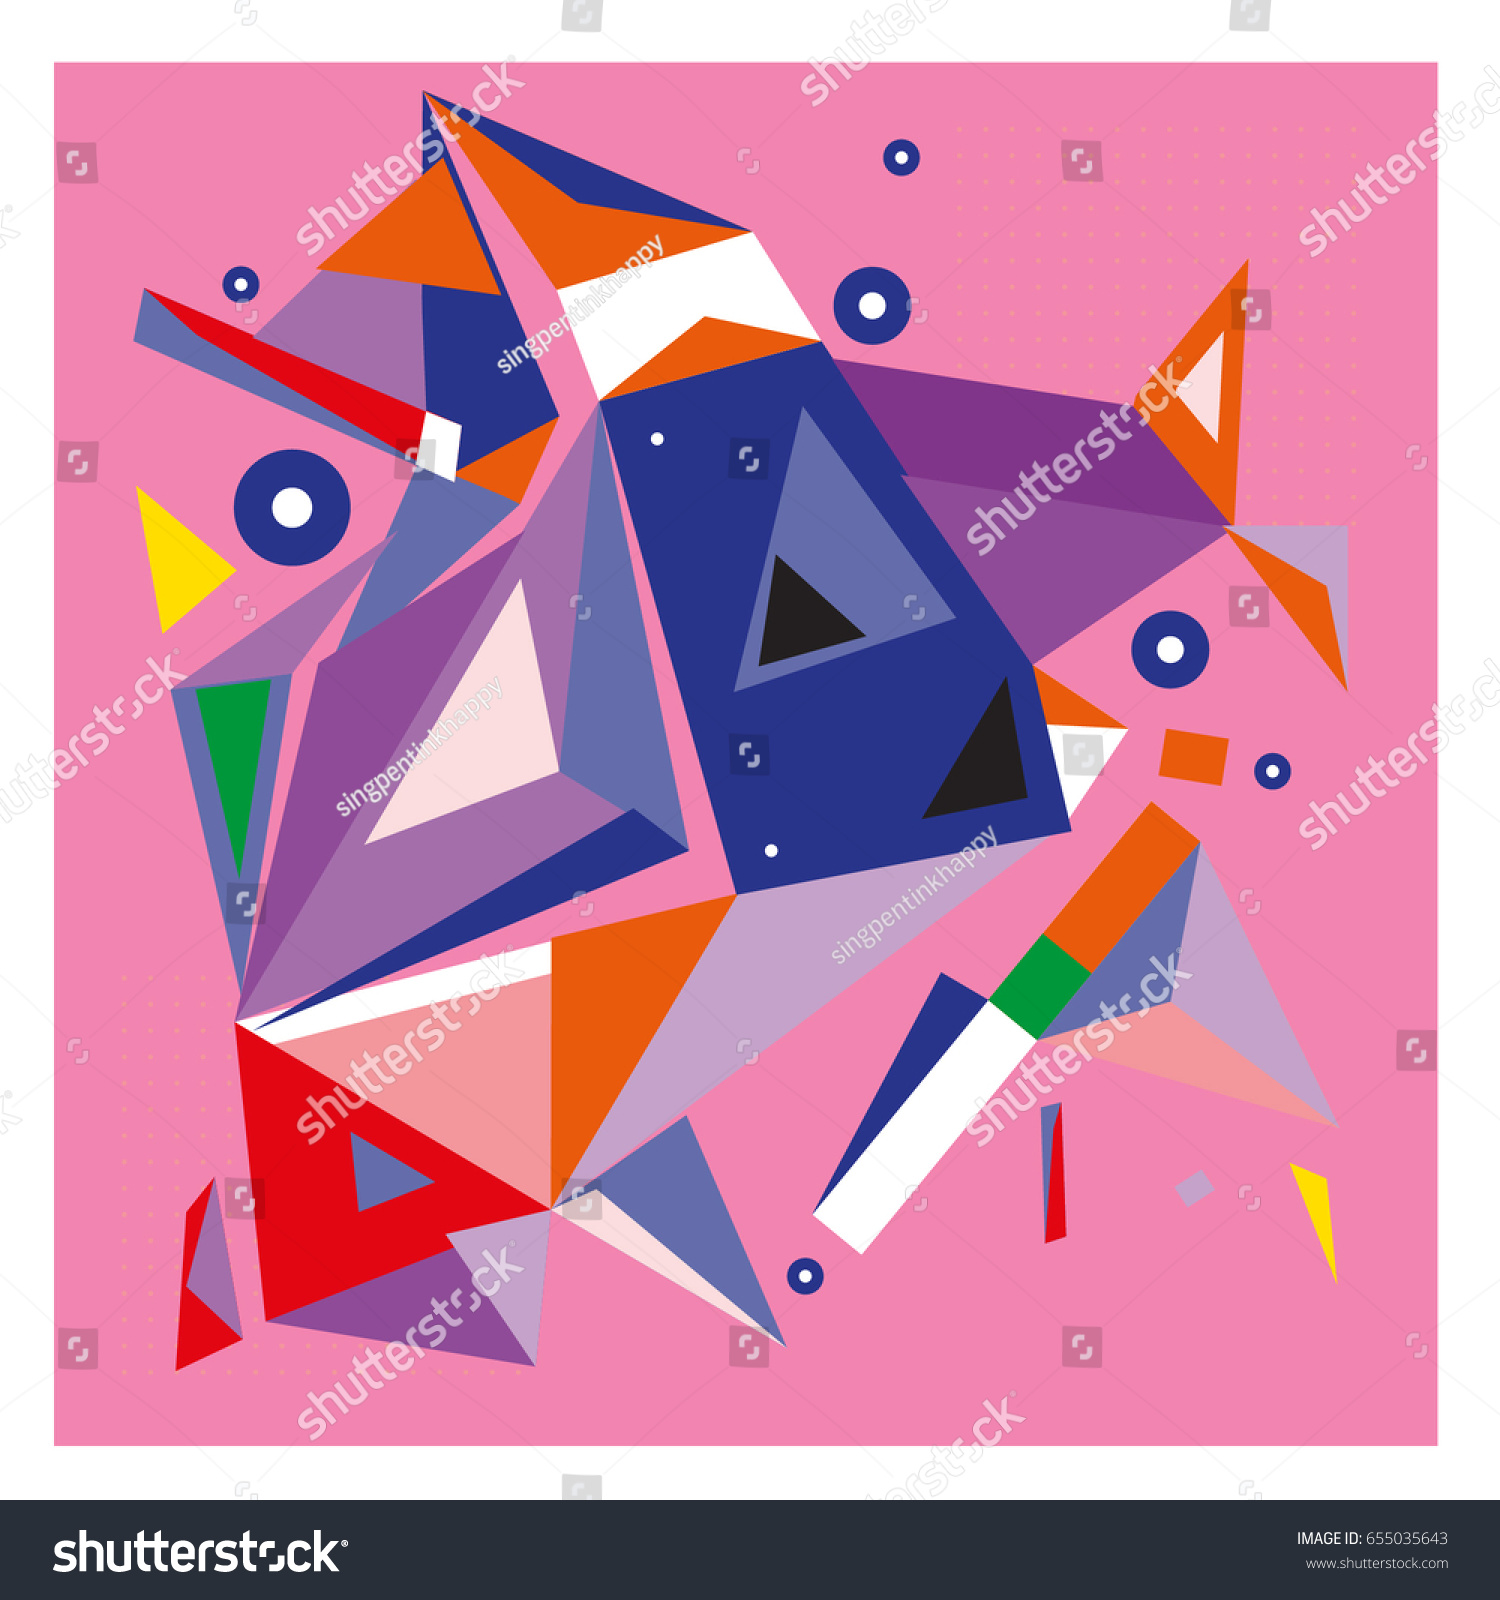 Vector Triangle Geometric 3d Forms Modern Stock Vector (Royalty Free ...